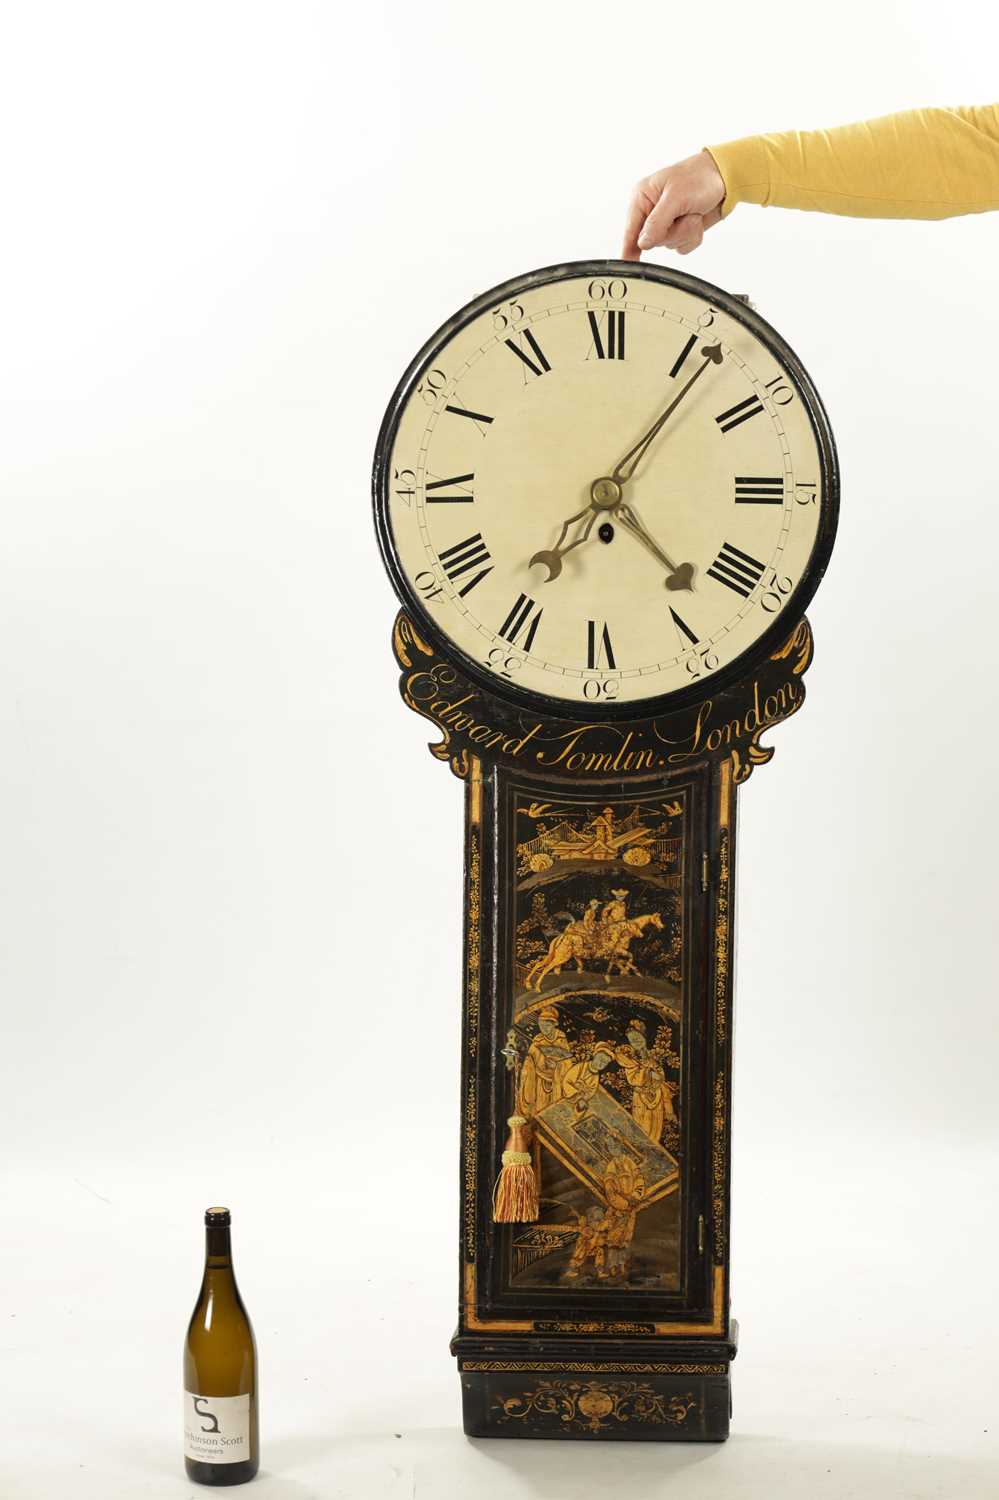 EDWARD TOMLIN, LONDON. A GEORGE III LACQUERED CHINOISERIE TAVERN CLOCK - Image 2 of 10